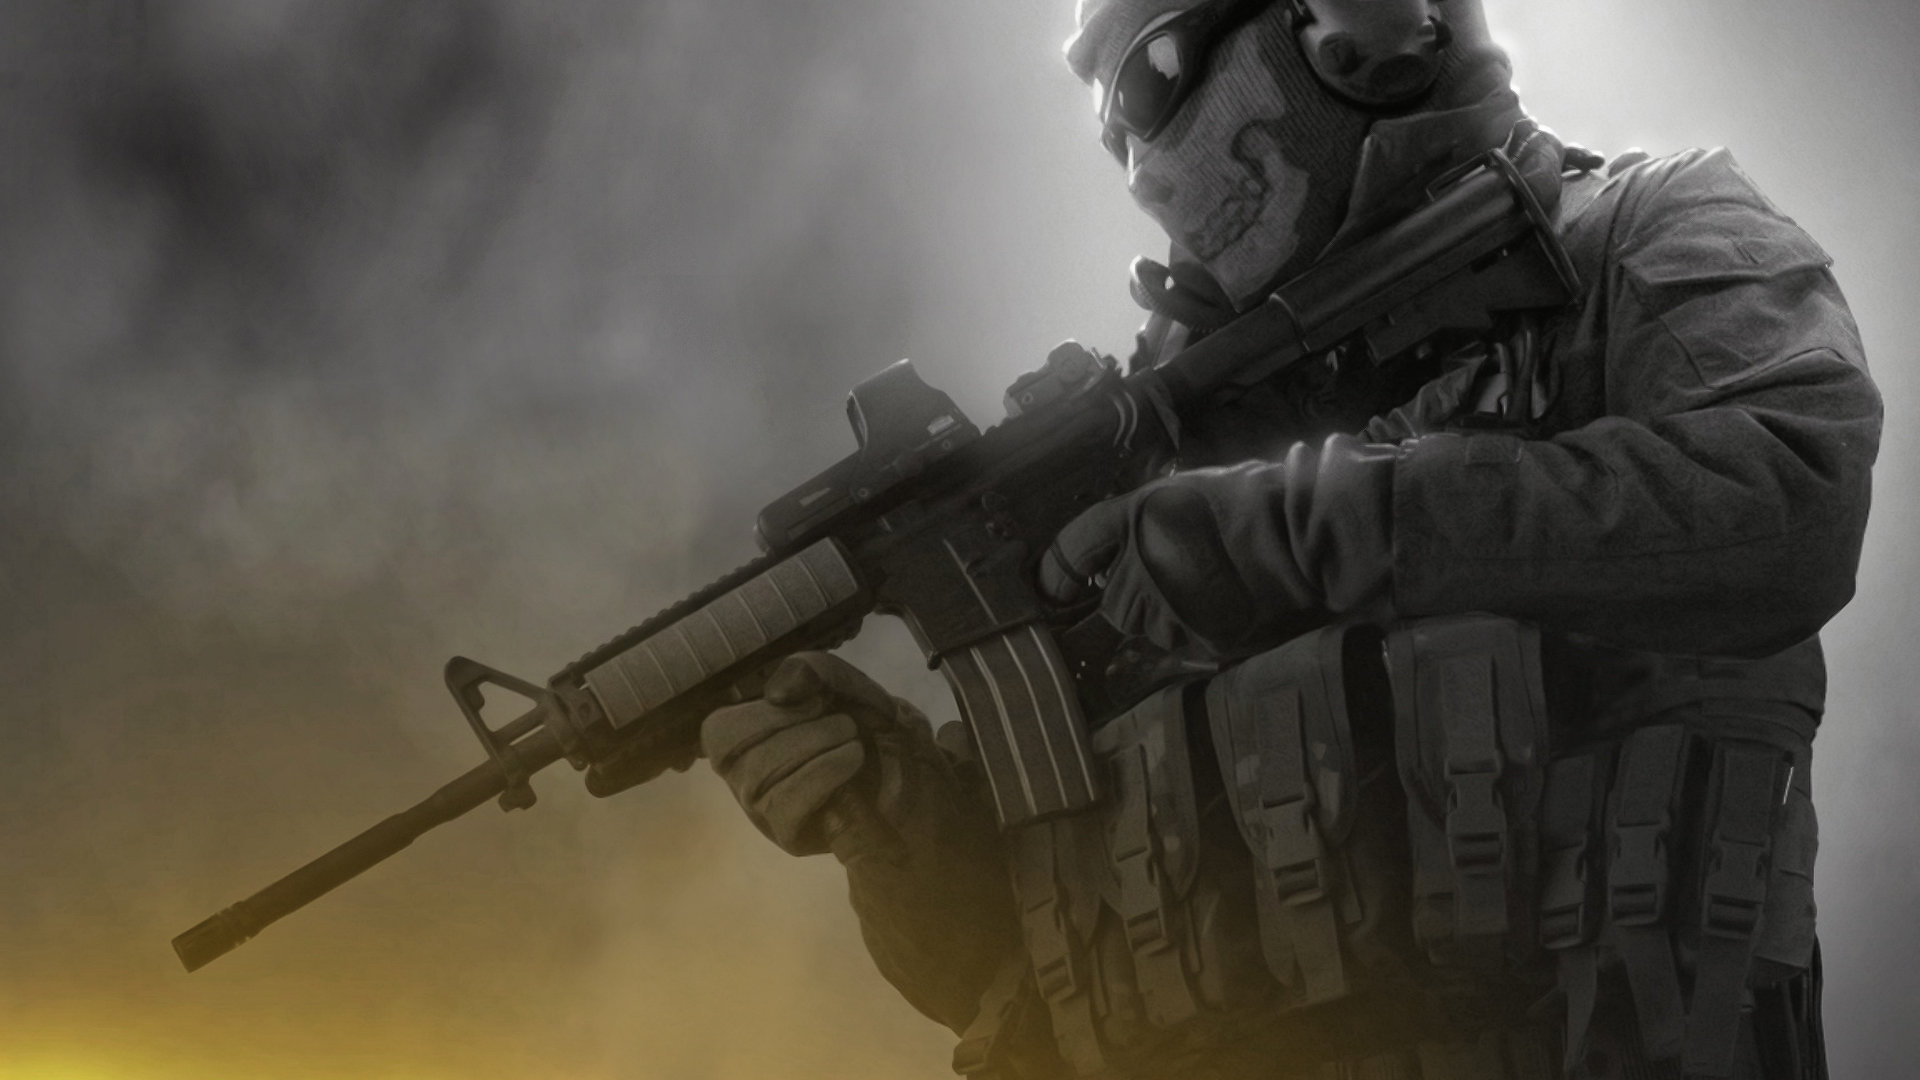 wallpapers call of duty: modern warfare 2, video game, firearm, military, call of duty